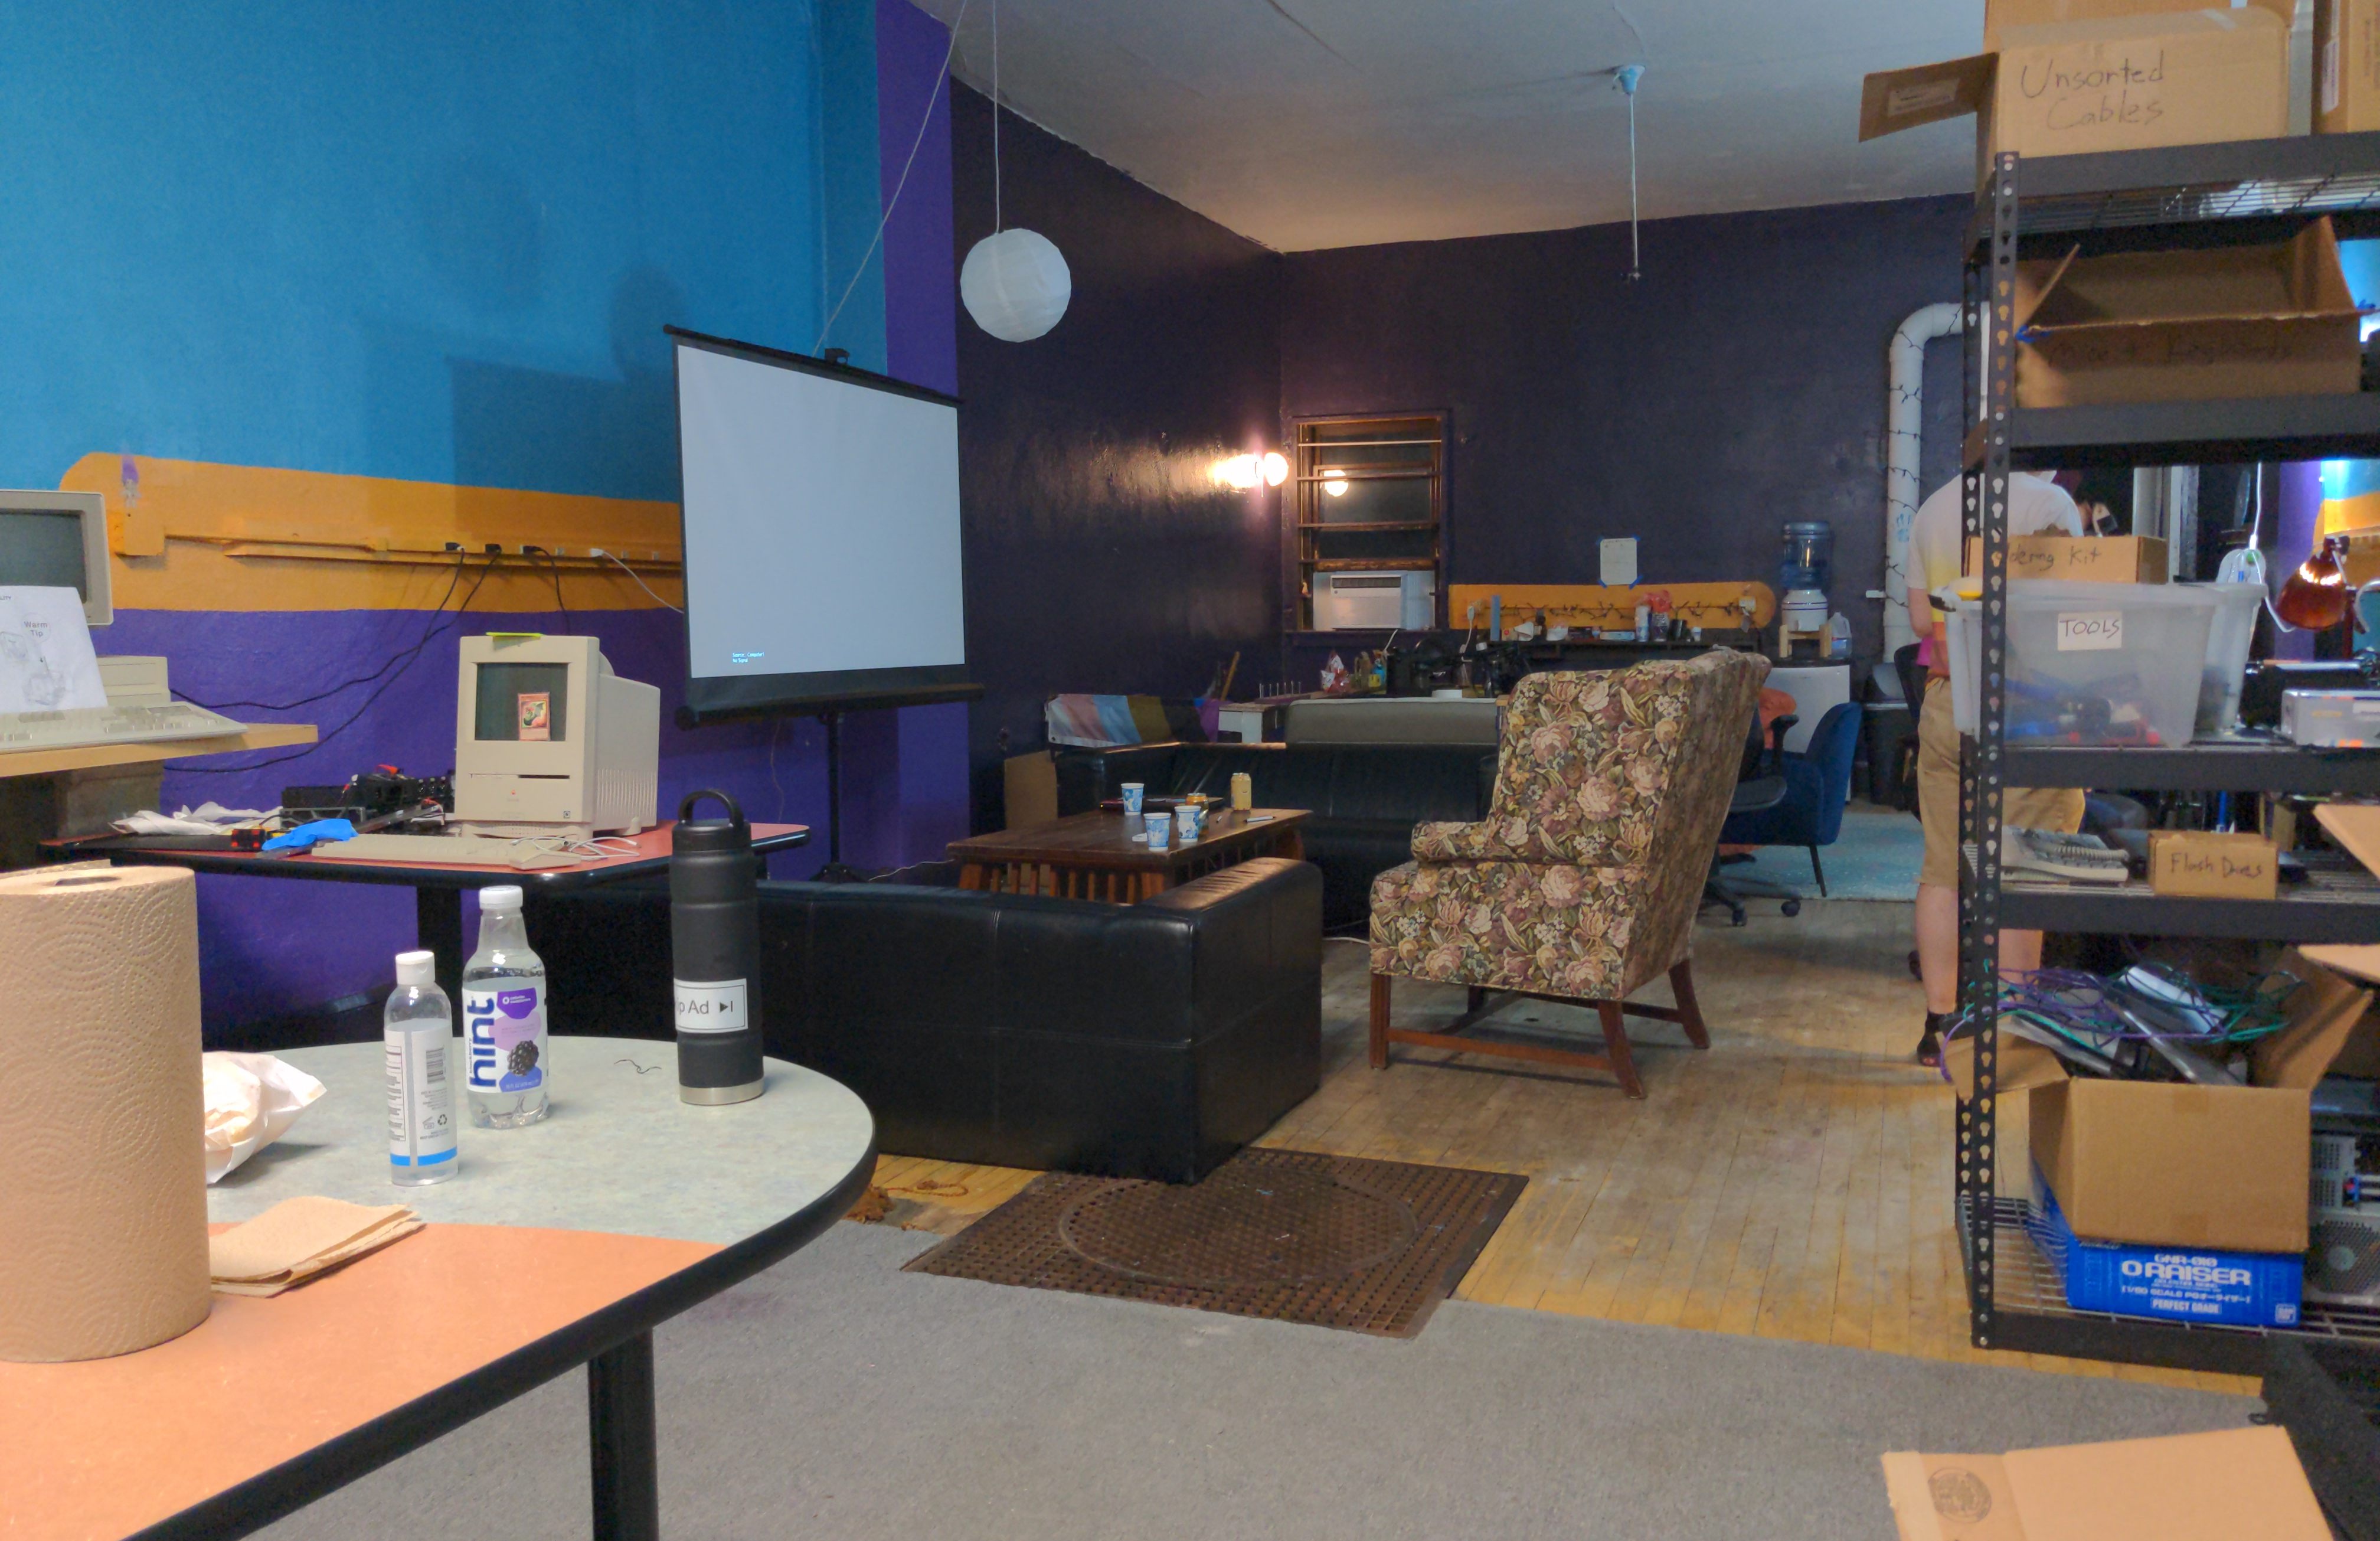 Photograph of the Layer Zero hackerspace featuring comfy padded armchairs and sofas,  a steel shelving unit, a projector screen, and workbenches with chairs.